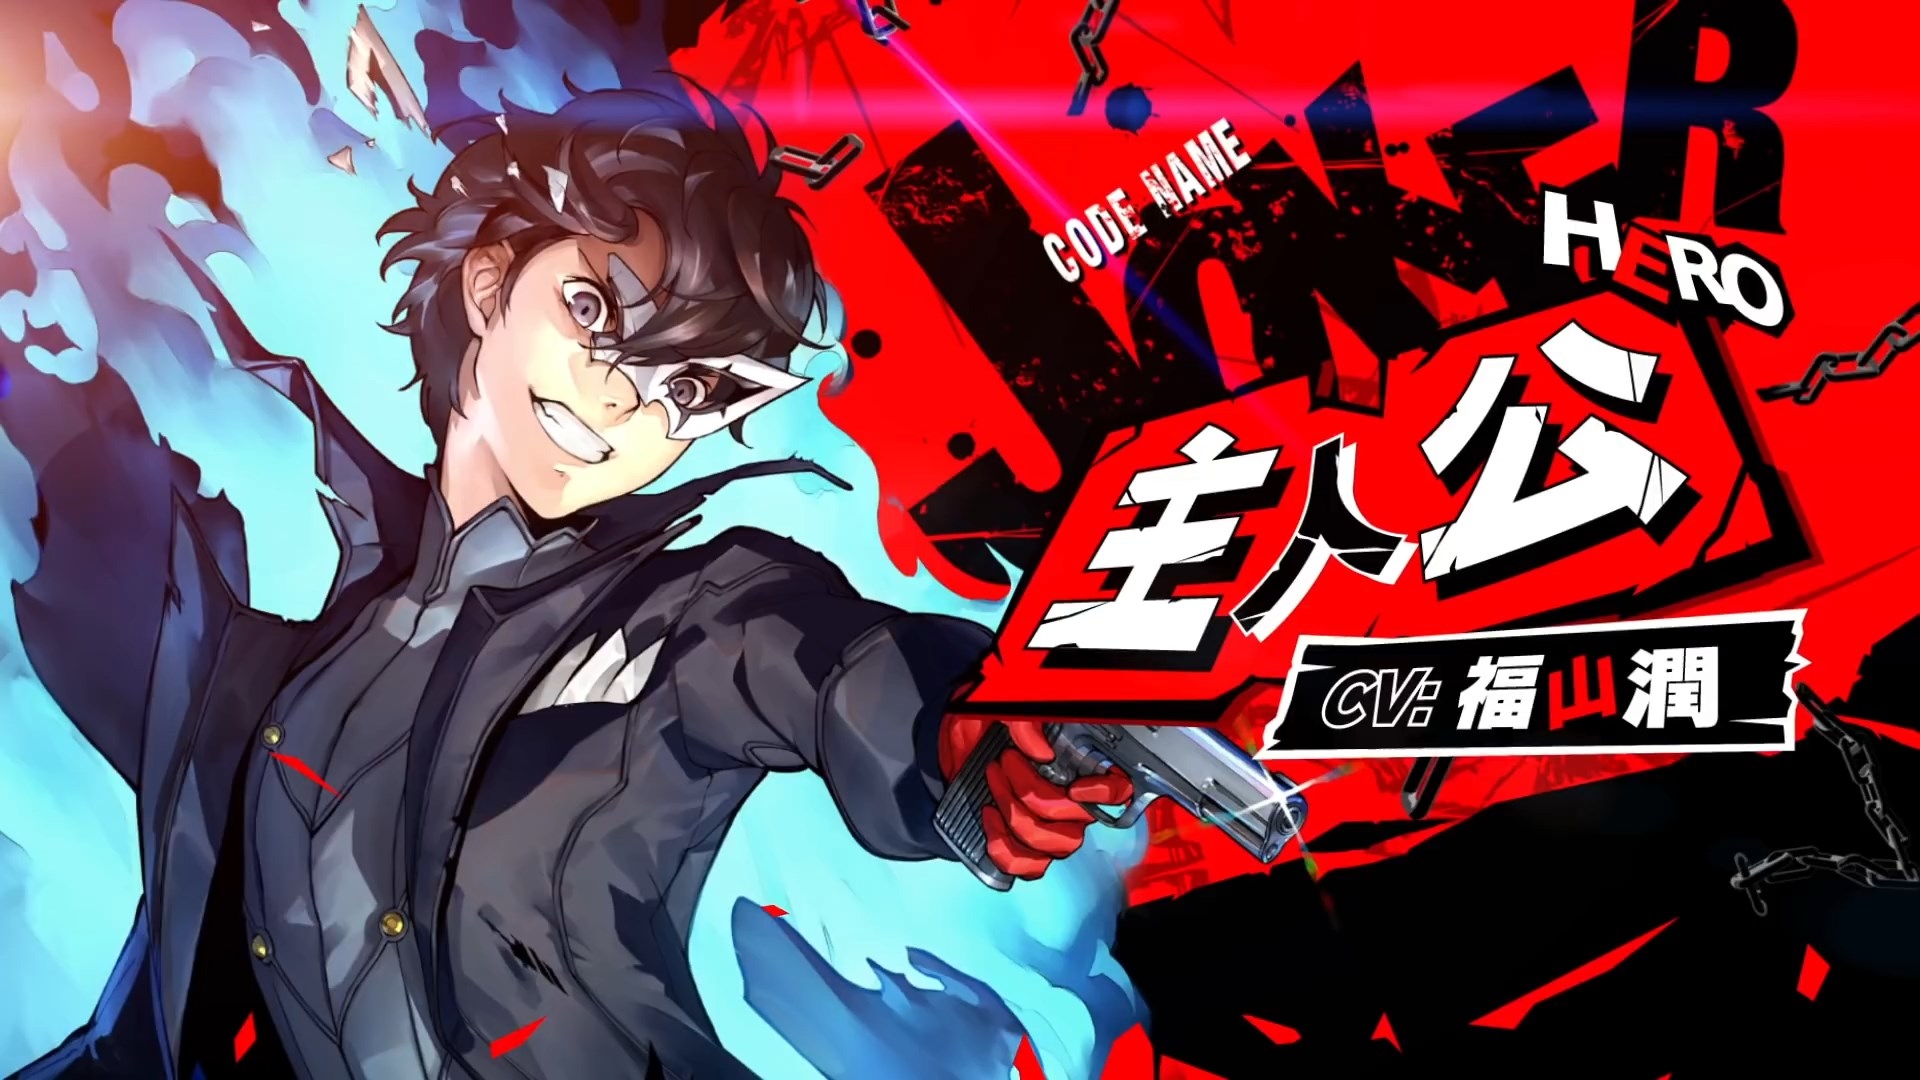 1536x48 Joker Persona 5 Scramble The Phantom Strikers 1536x48 Resolution Wallpaper Hd Games 4k Wallpapers Images Photos And Background Wallpapers Den